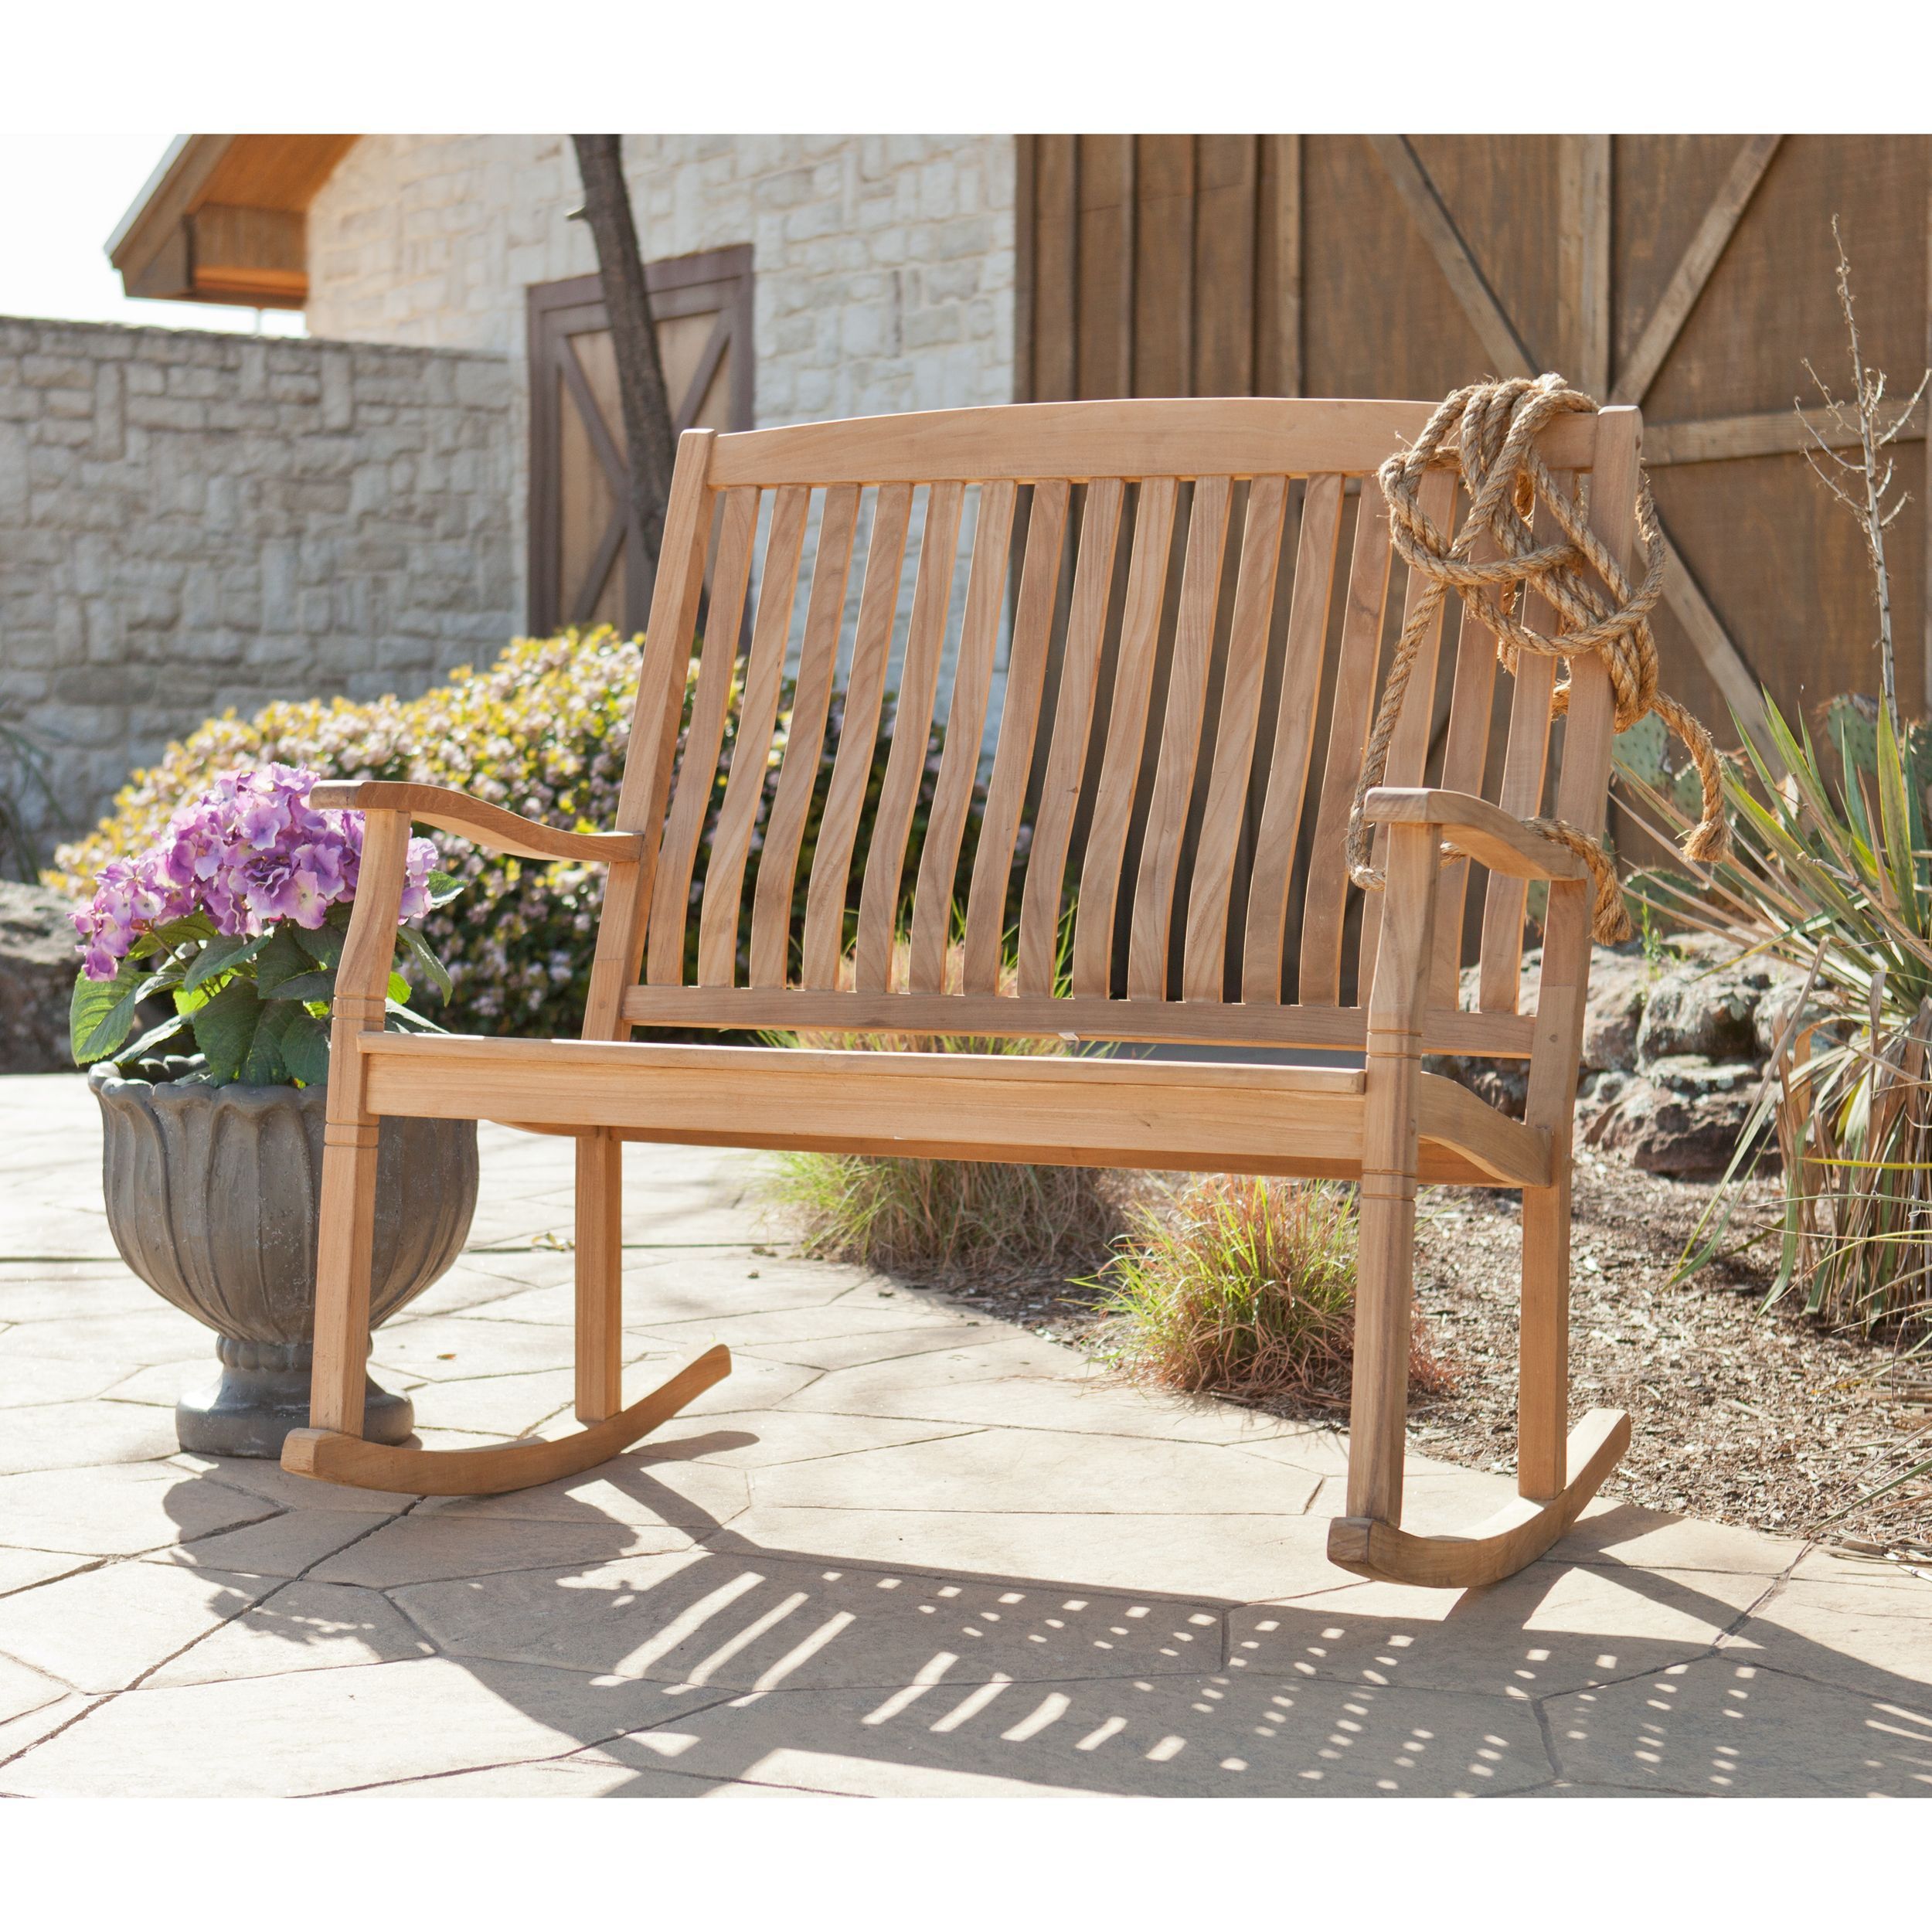 The Graceful Yet Rustic Style Of This Teak Glider Bench Is Regarding Teak Glider Benches (View 3 of 25)